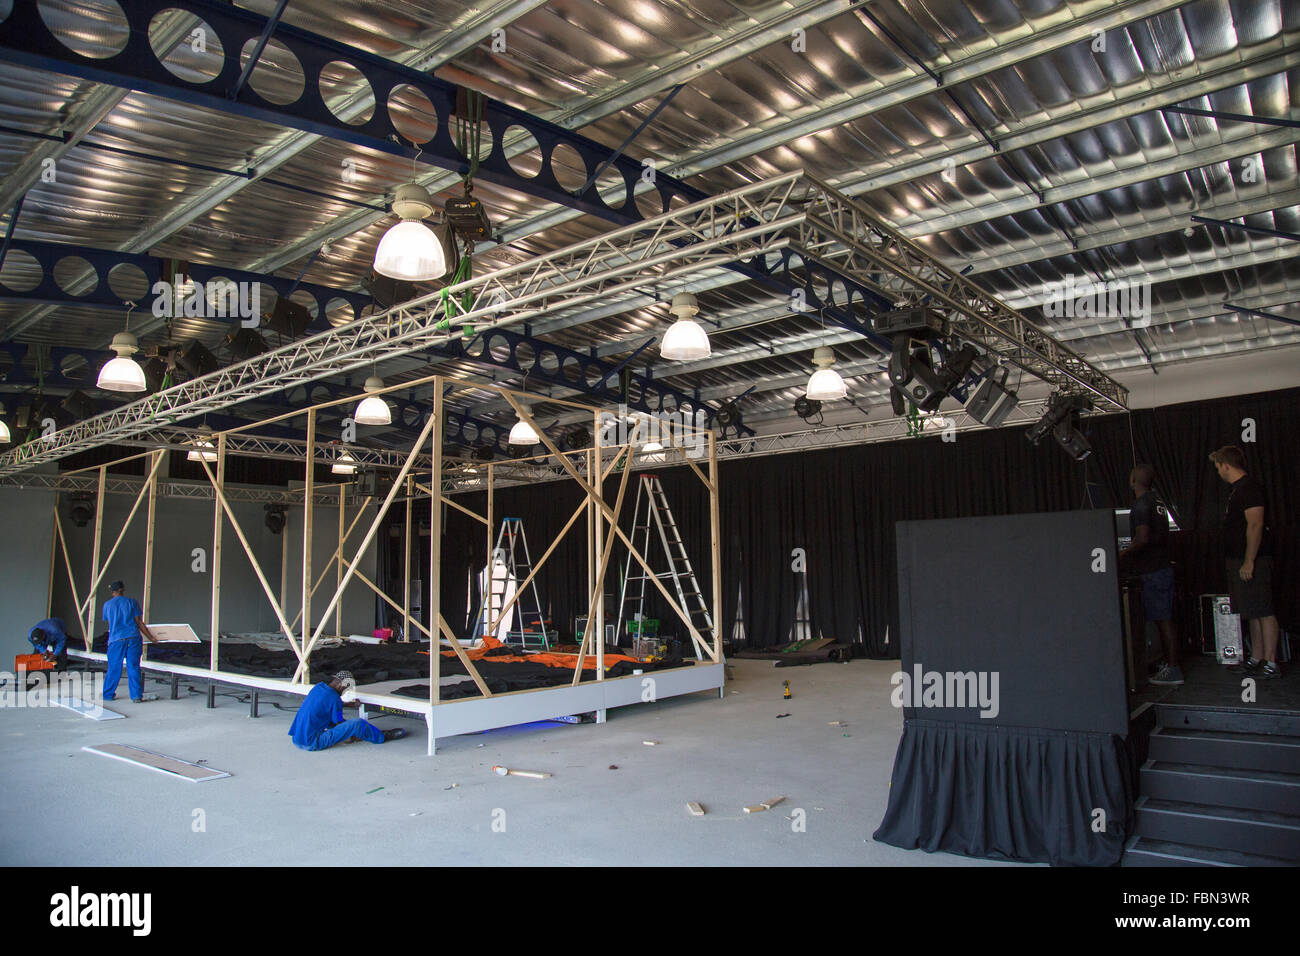 An event's management company building up a stage and runway preparing for a fashion show in a hall Stock Photo